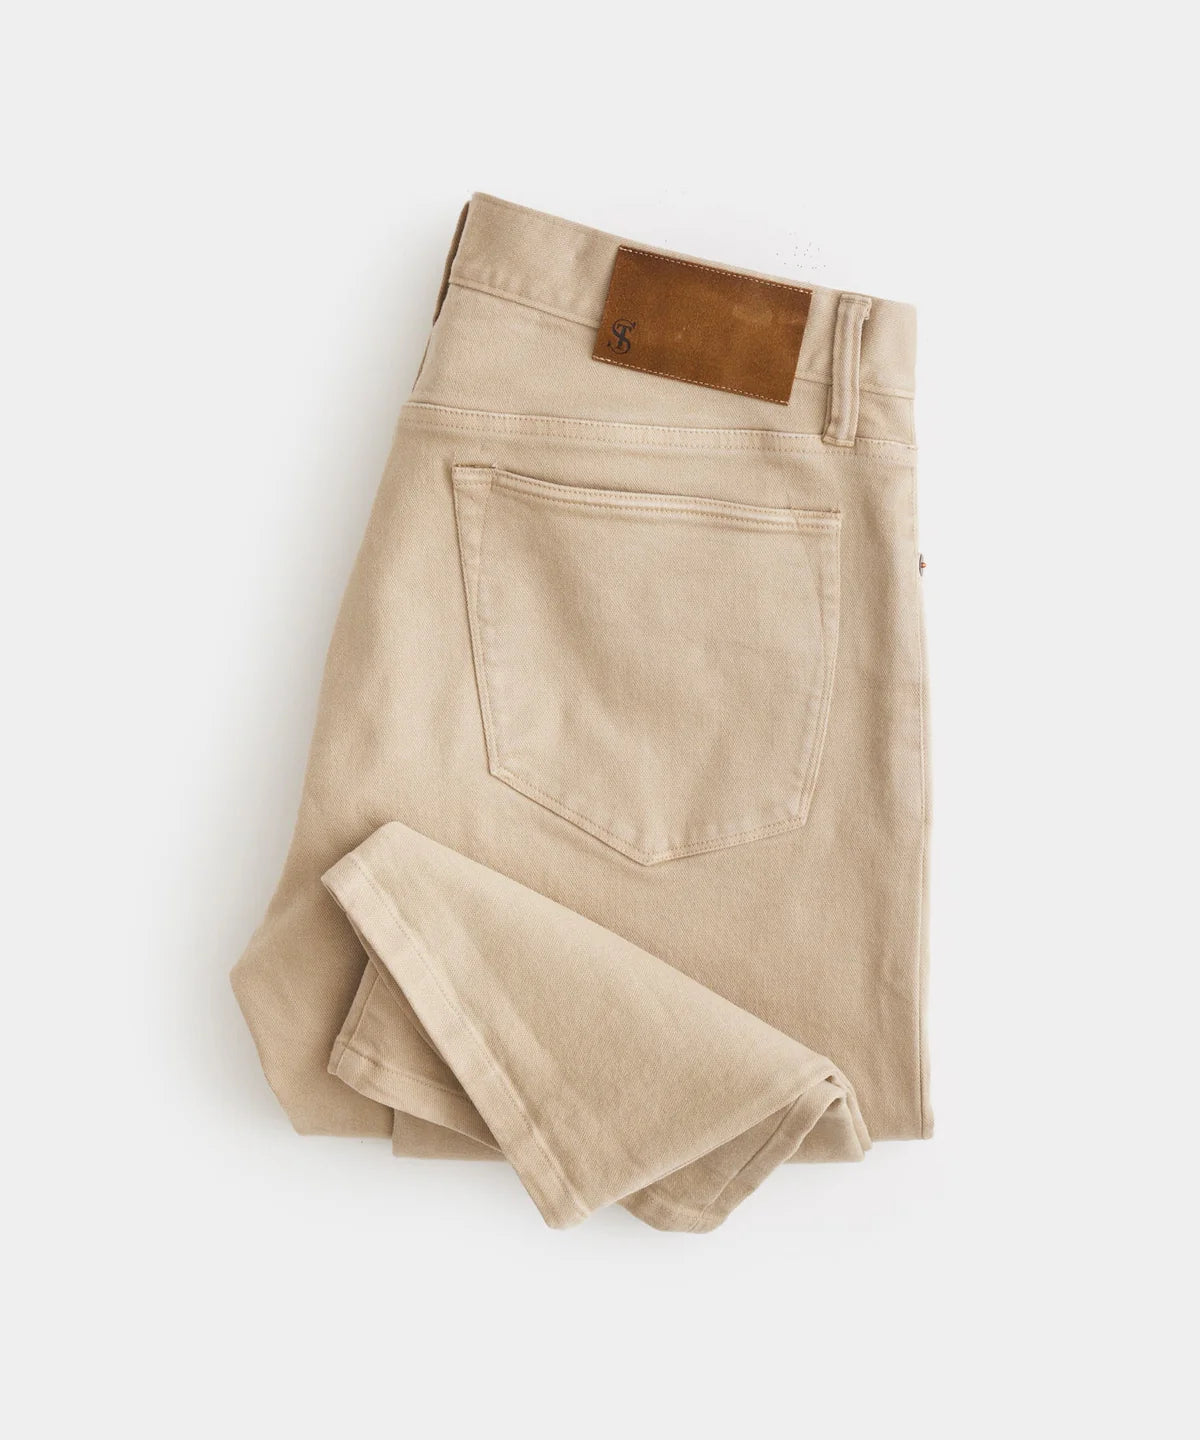 TODD SNYDER STRAIGHT FIT 5-POCKET CHINO IN CASUAL KHAKI